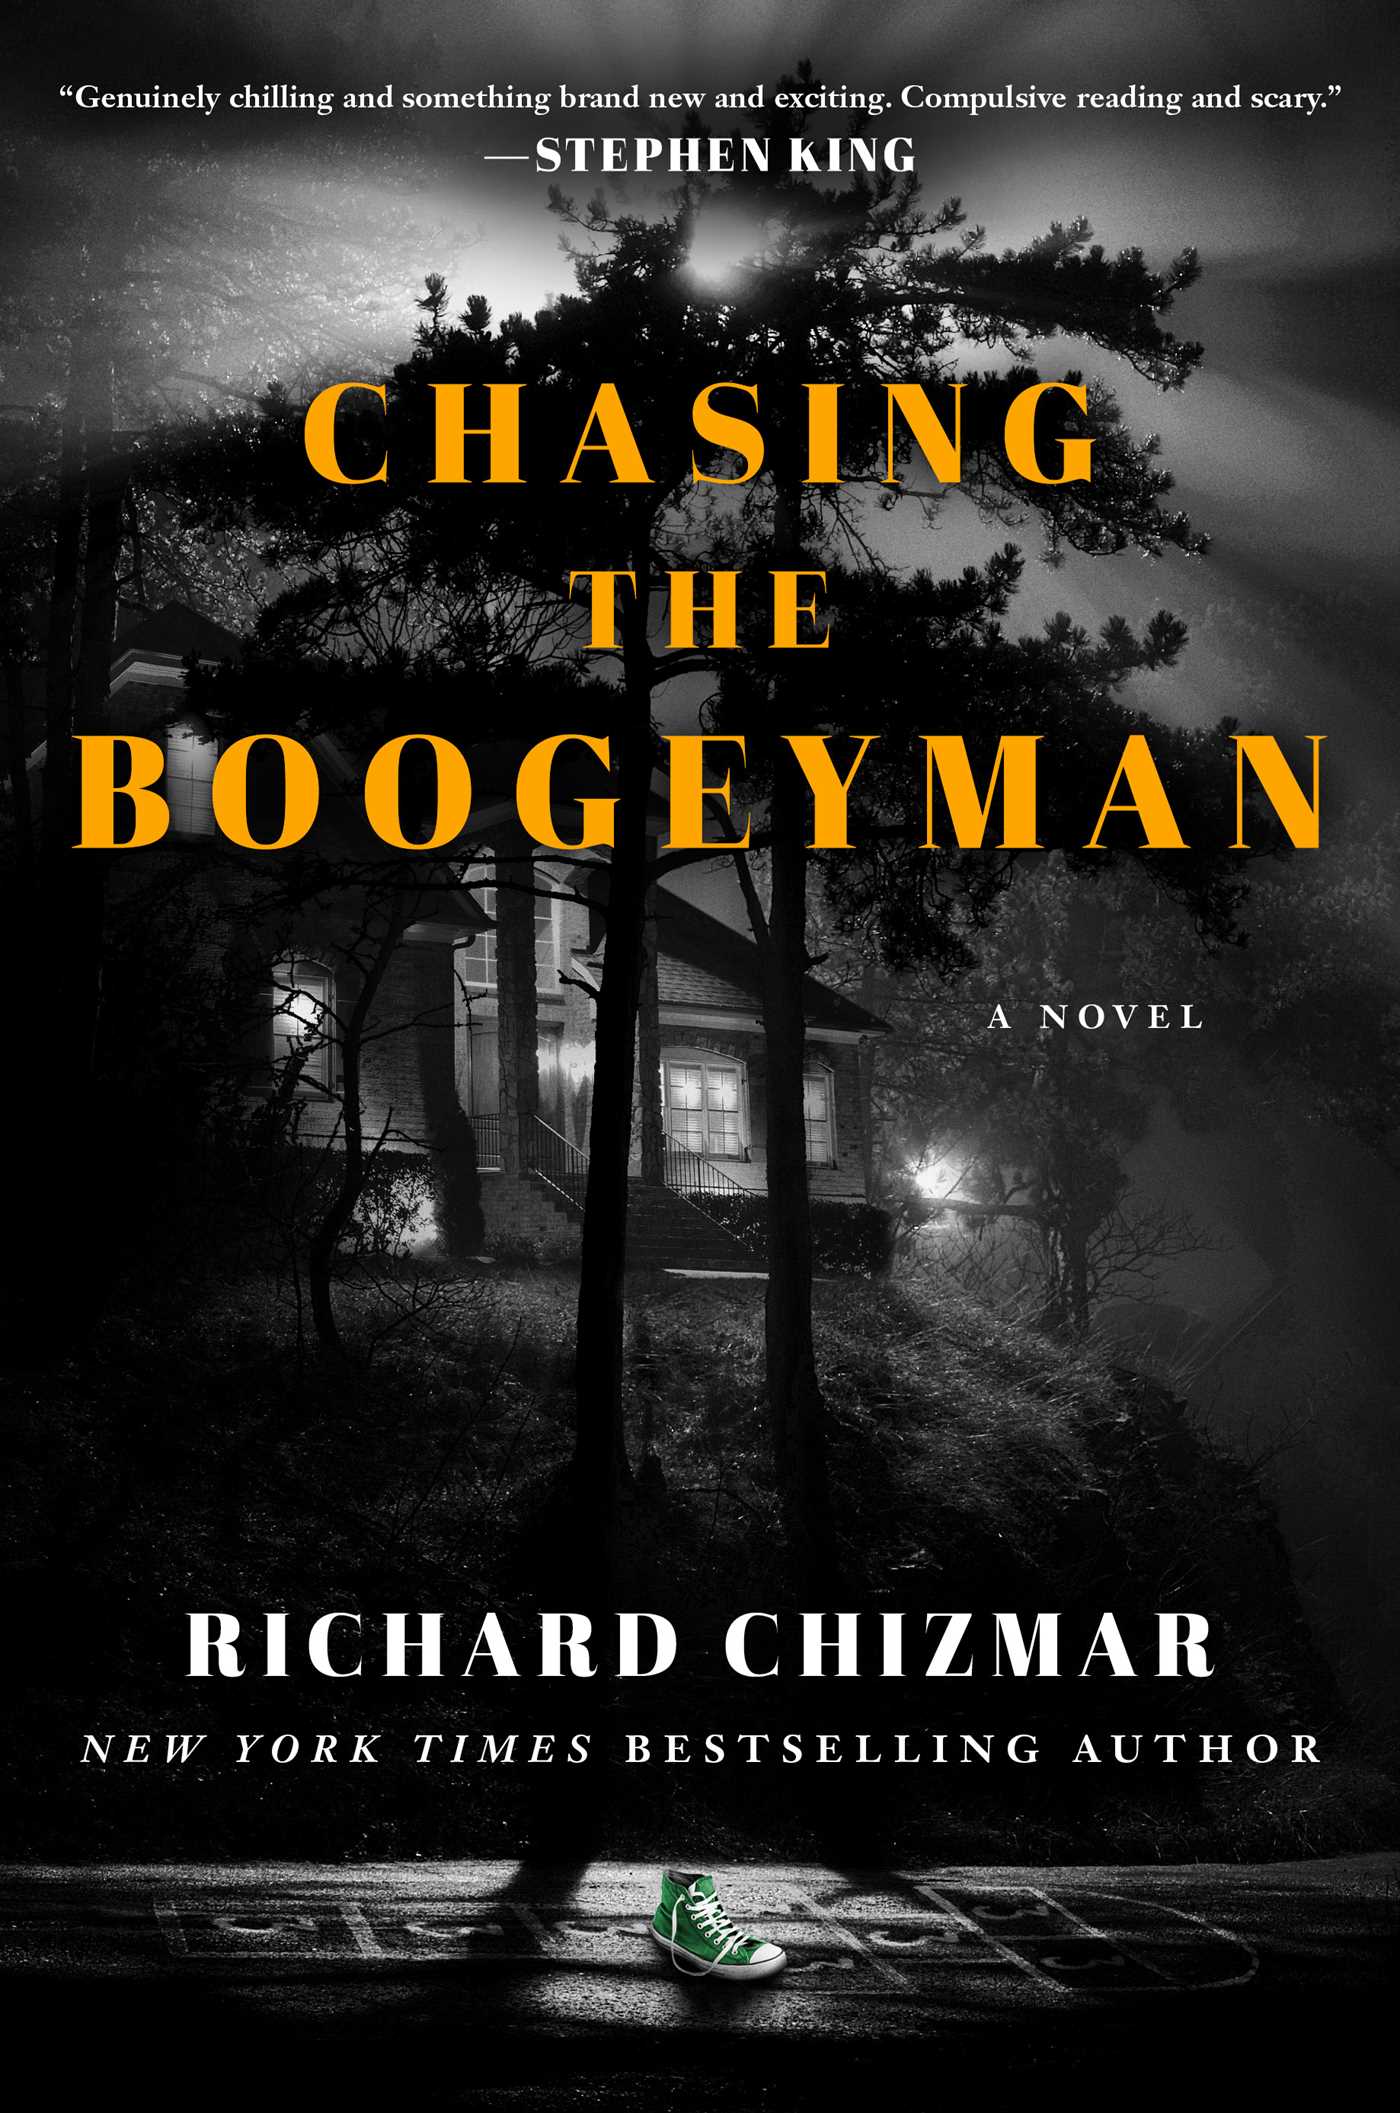 Cover Image for "Chasing the Boogeyman" 